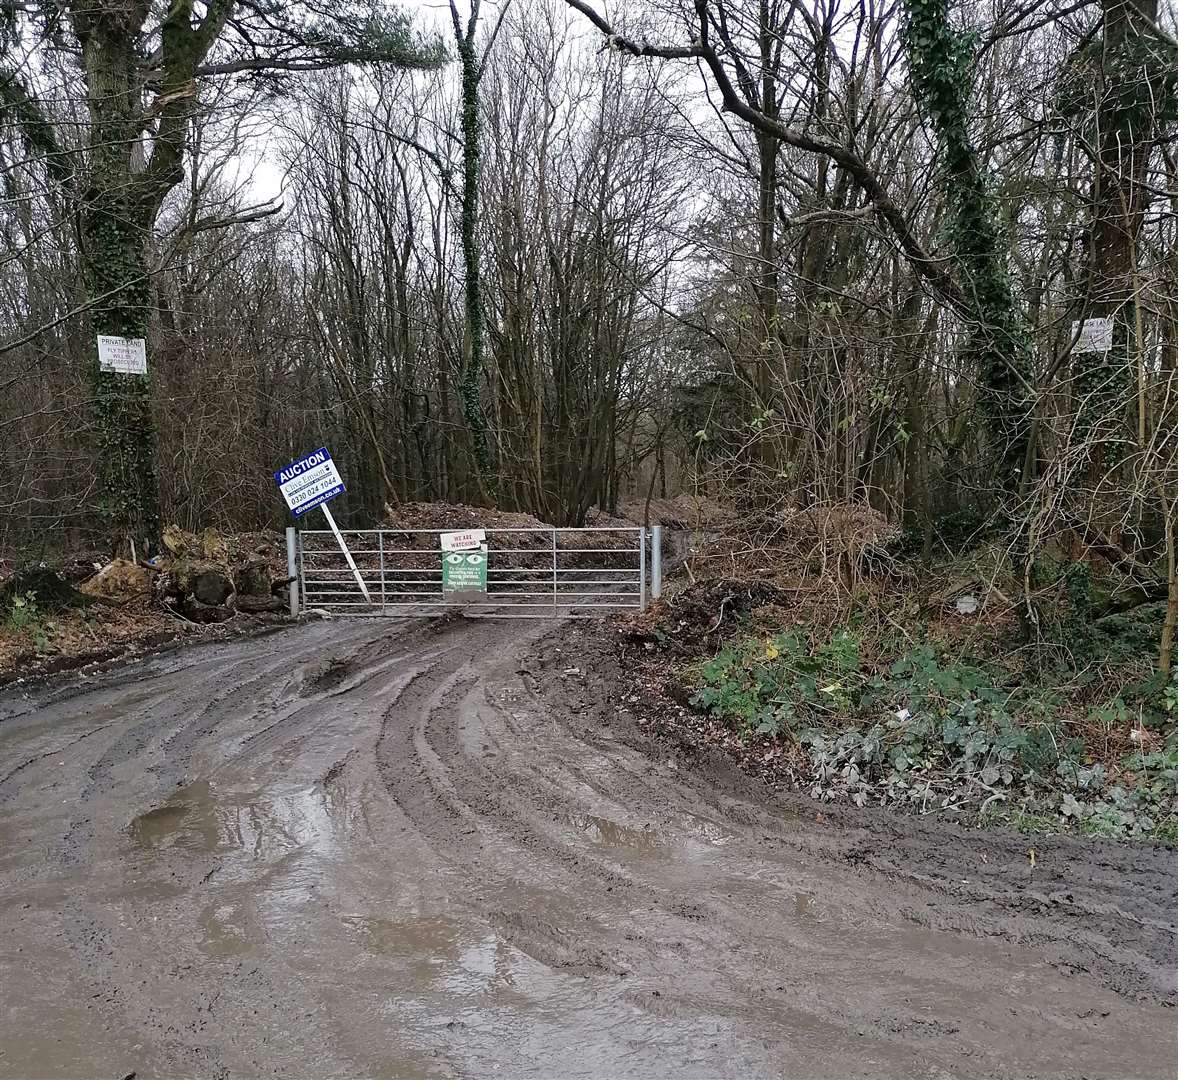 The Environment Agency has now closed off the woodland